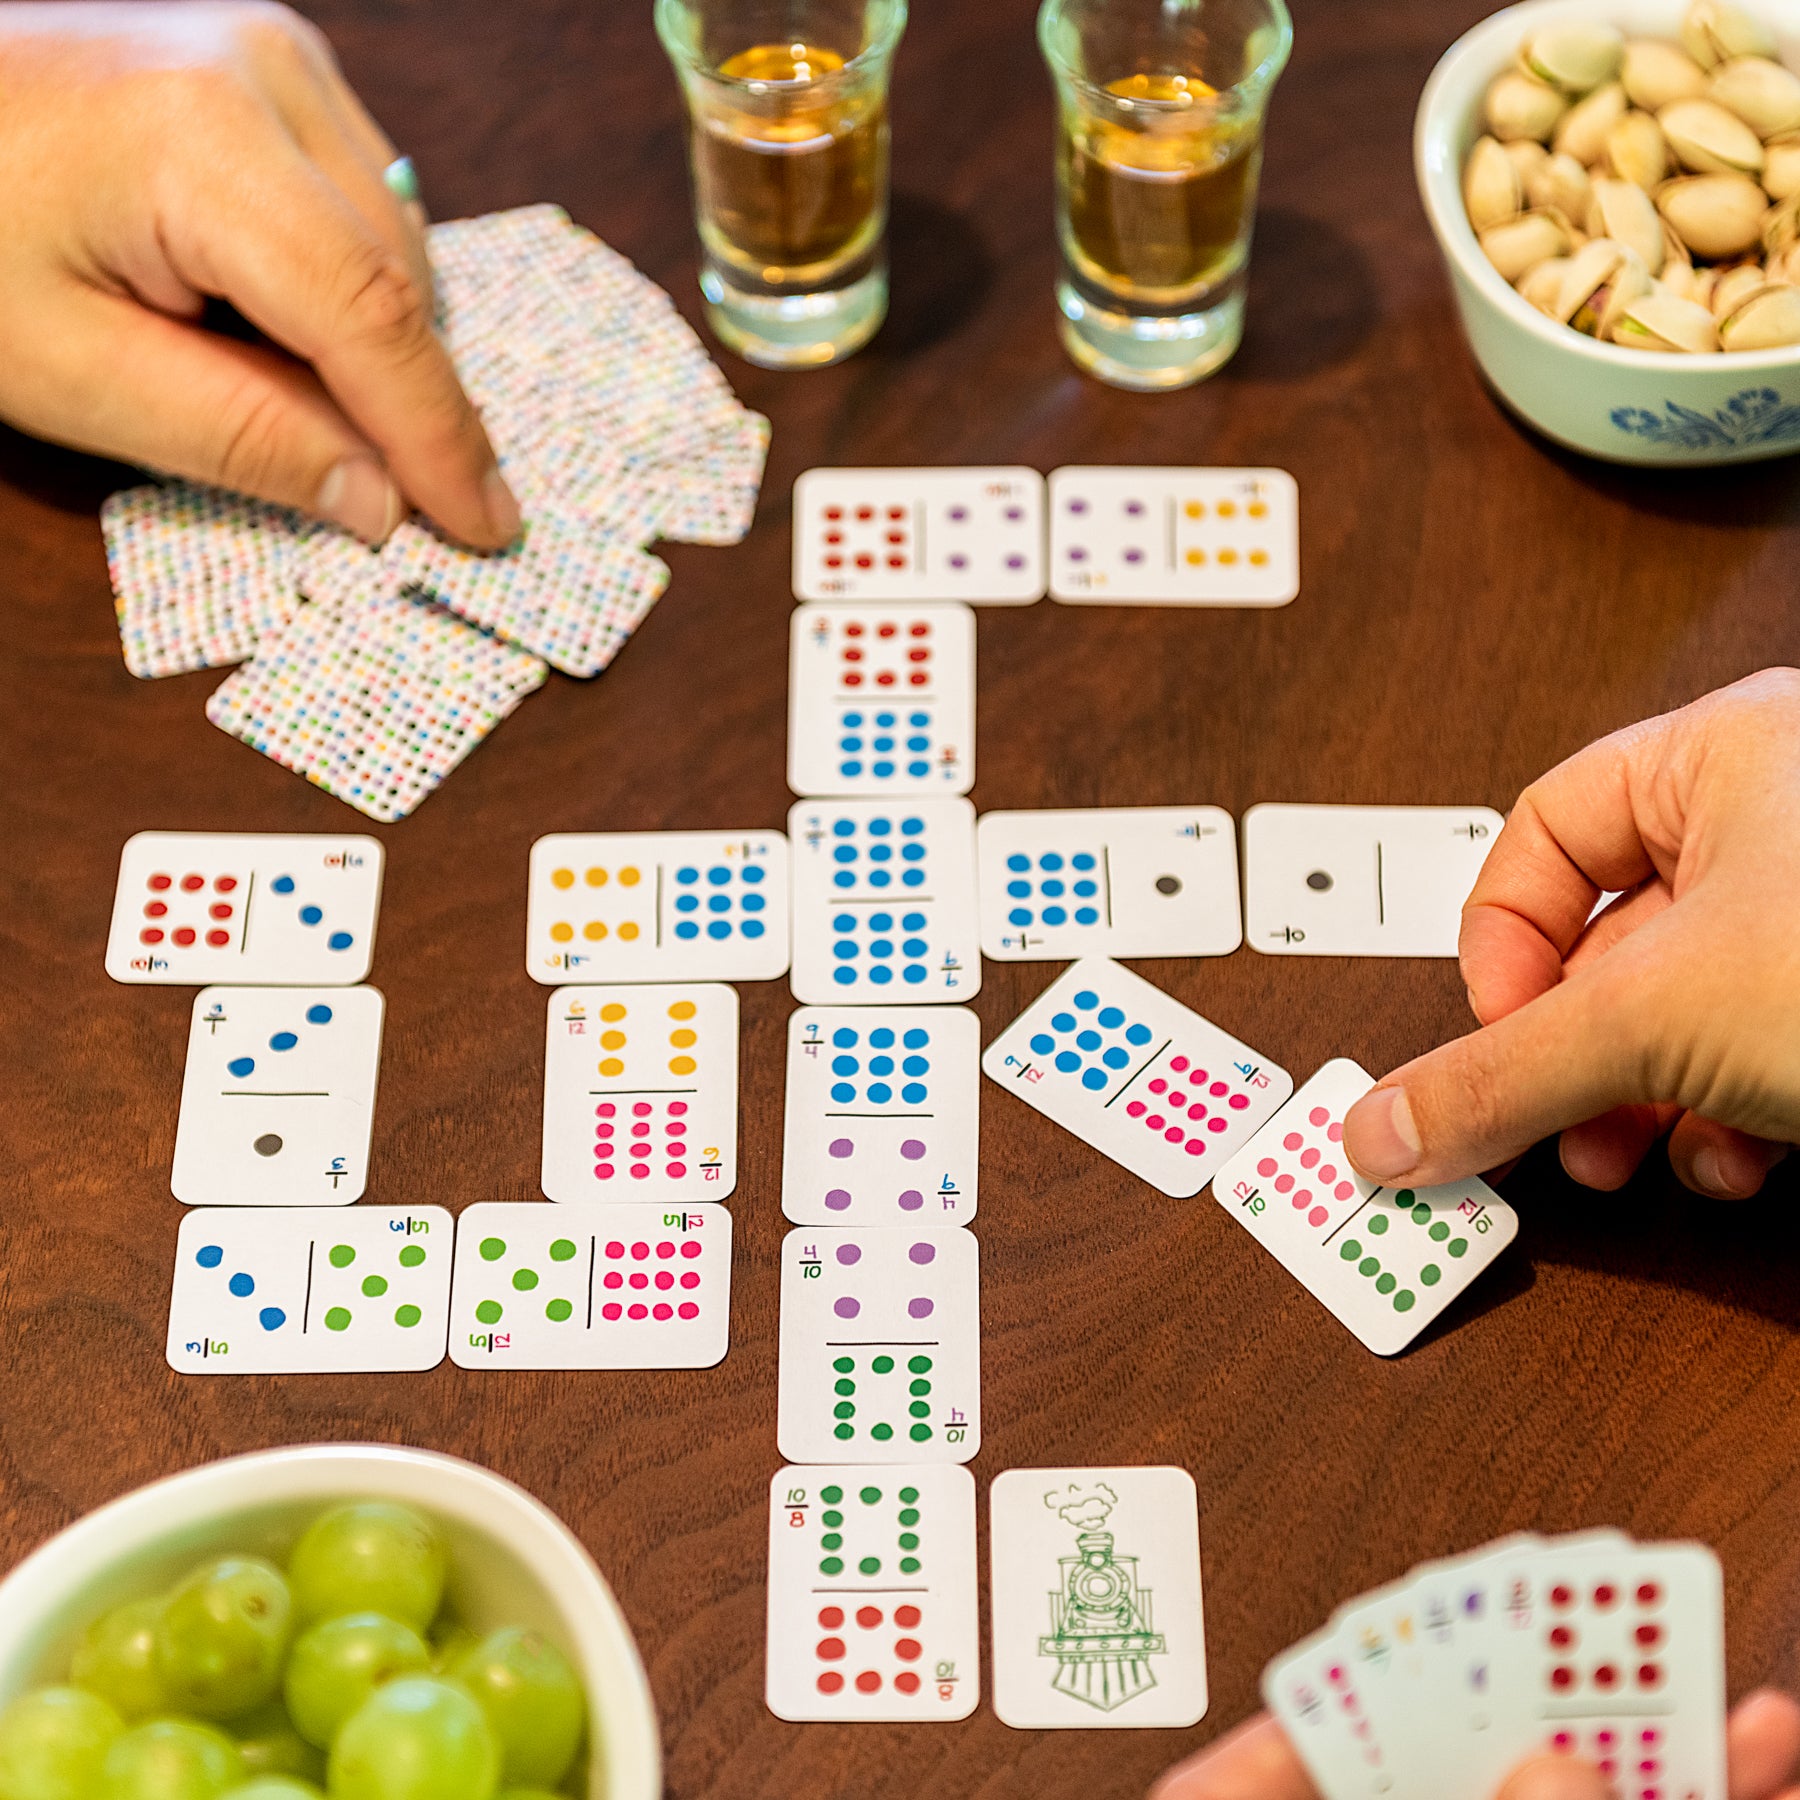 6 Ways to Play Dominoes Online: Classic & Variations